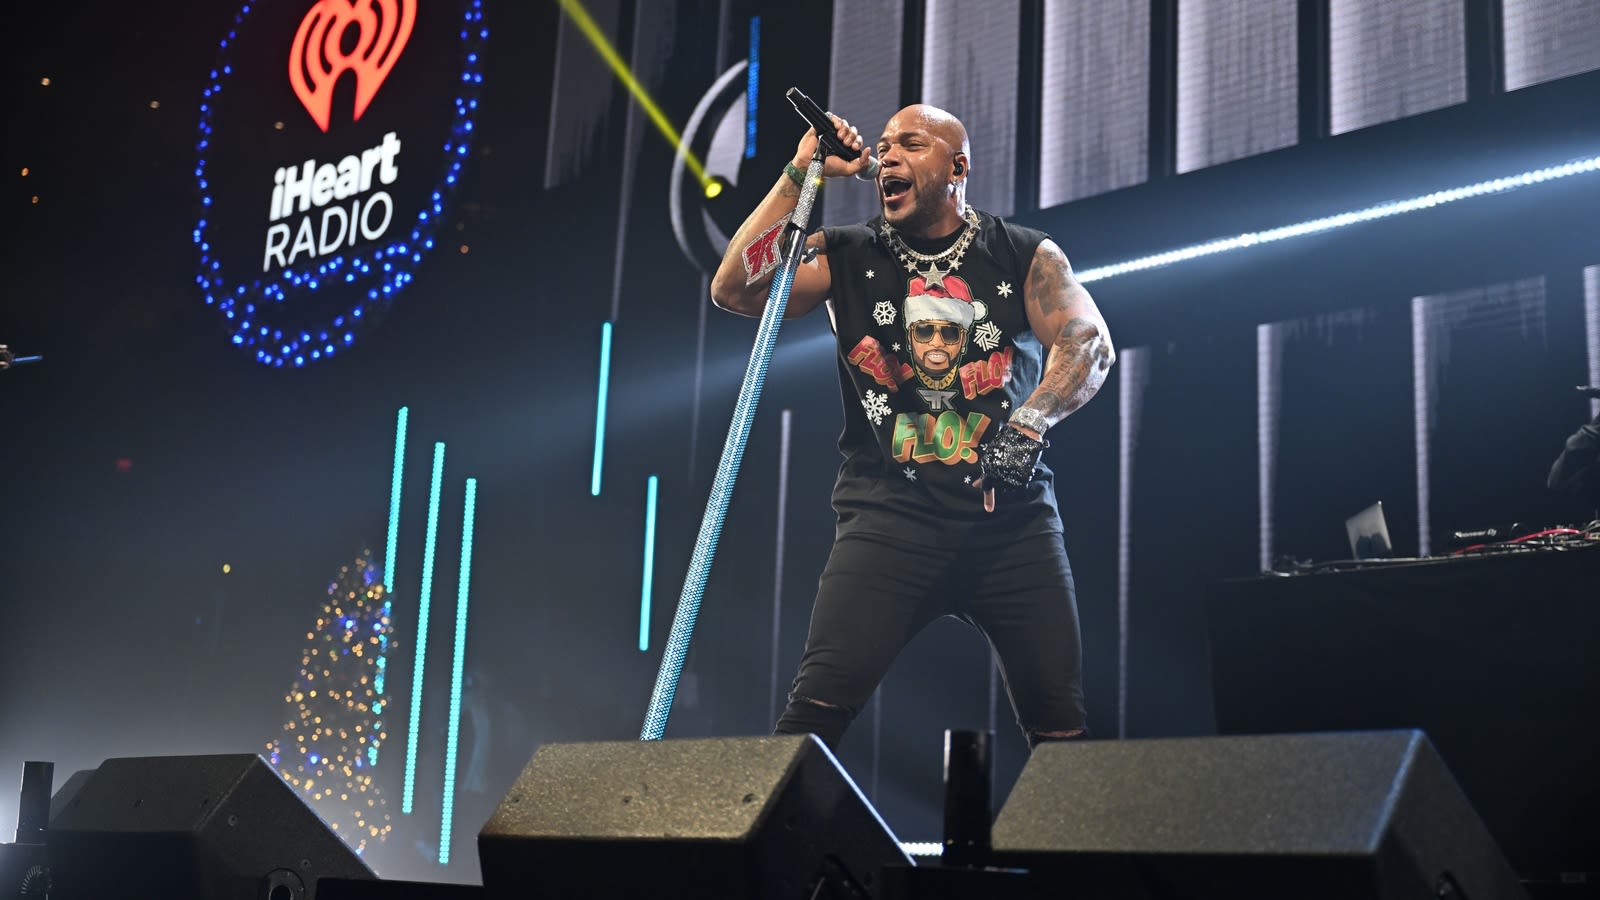 Supreme Court allows copyright claim tied to rapper Flo Rida track to proceed